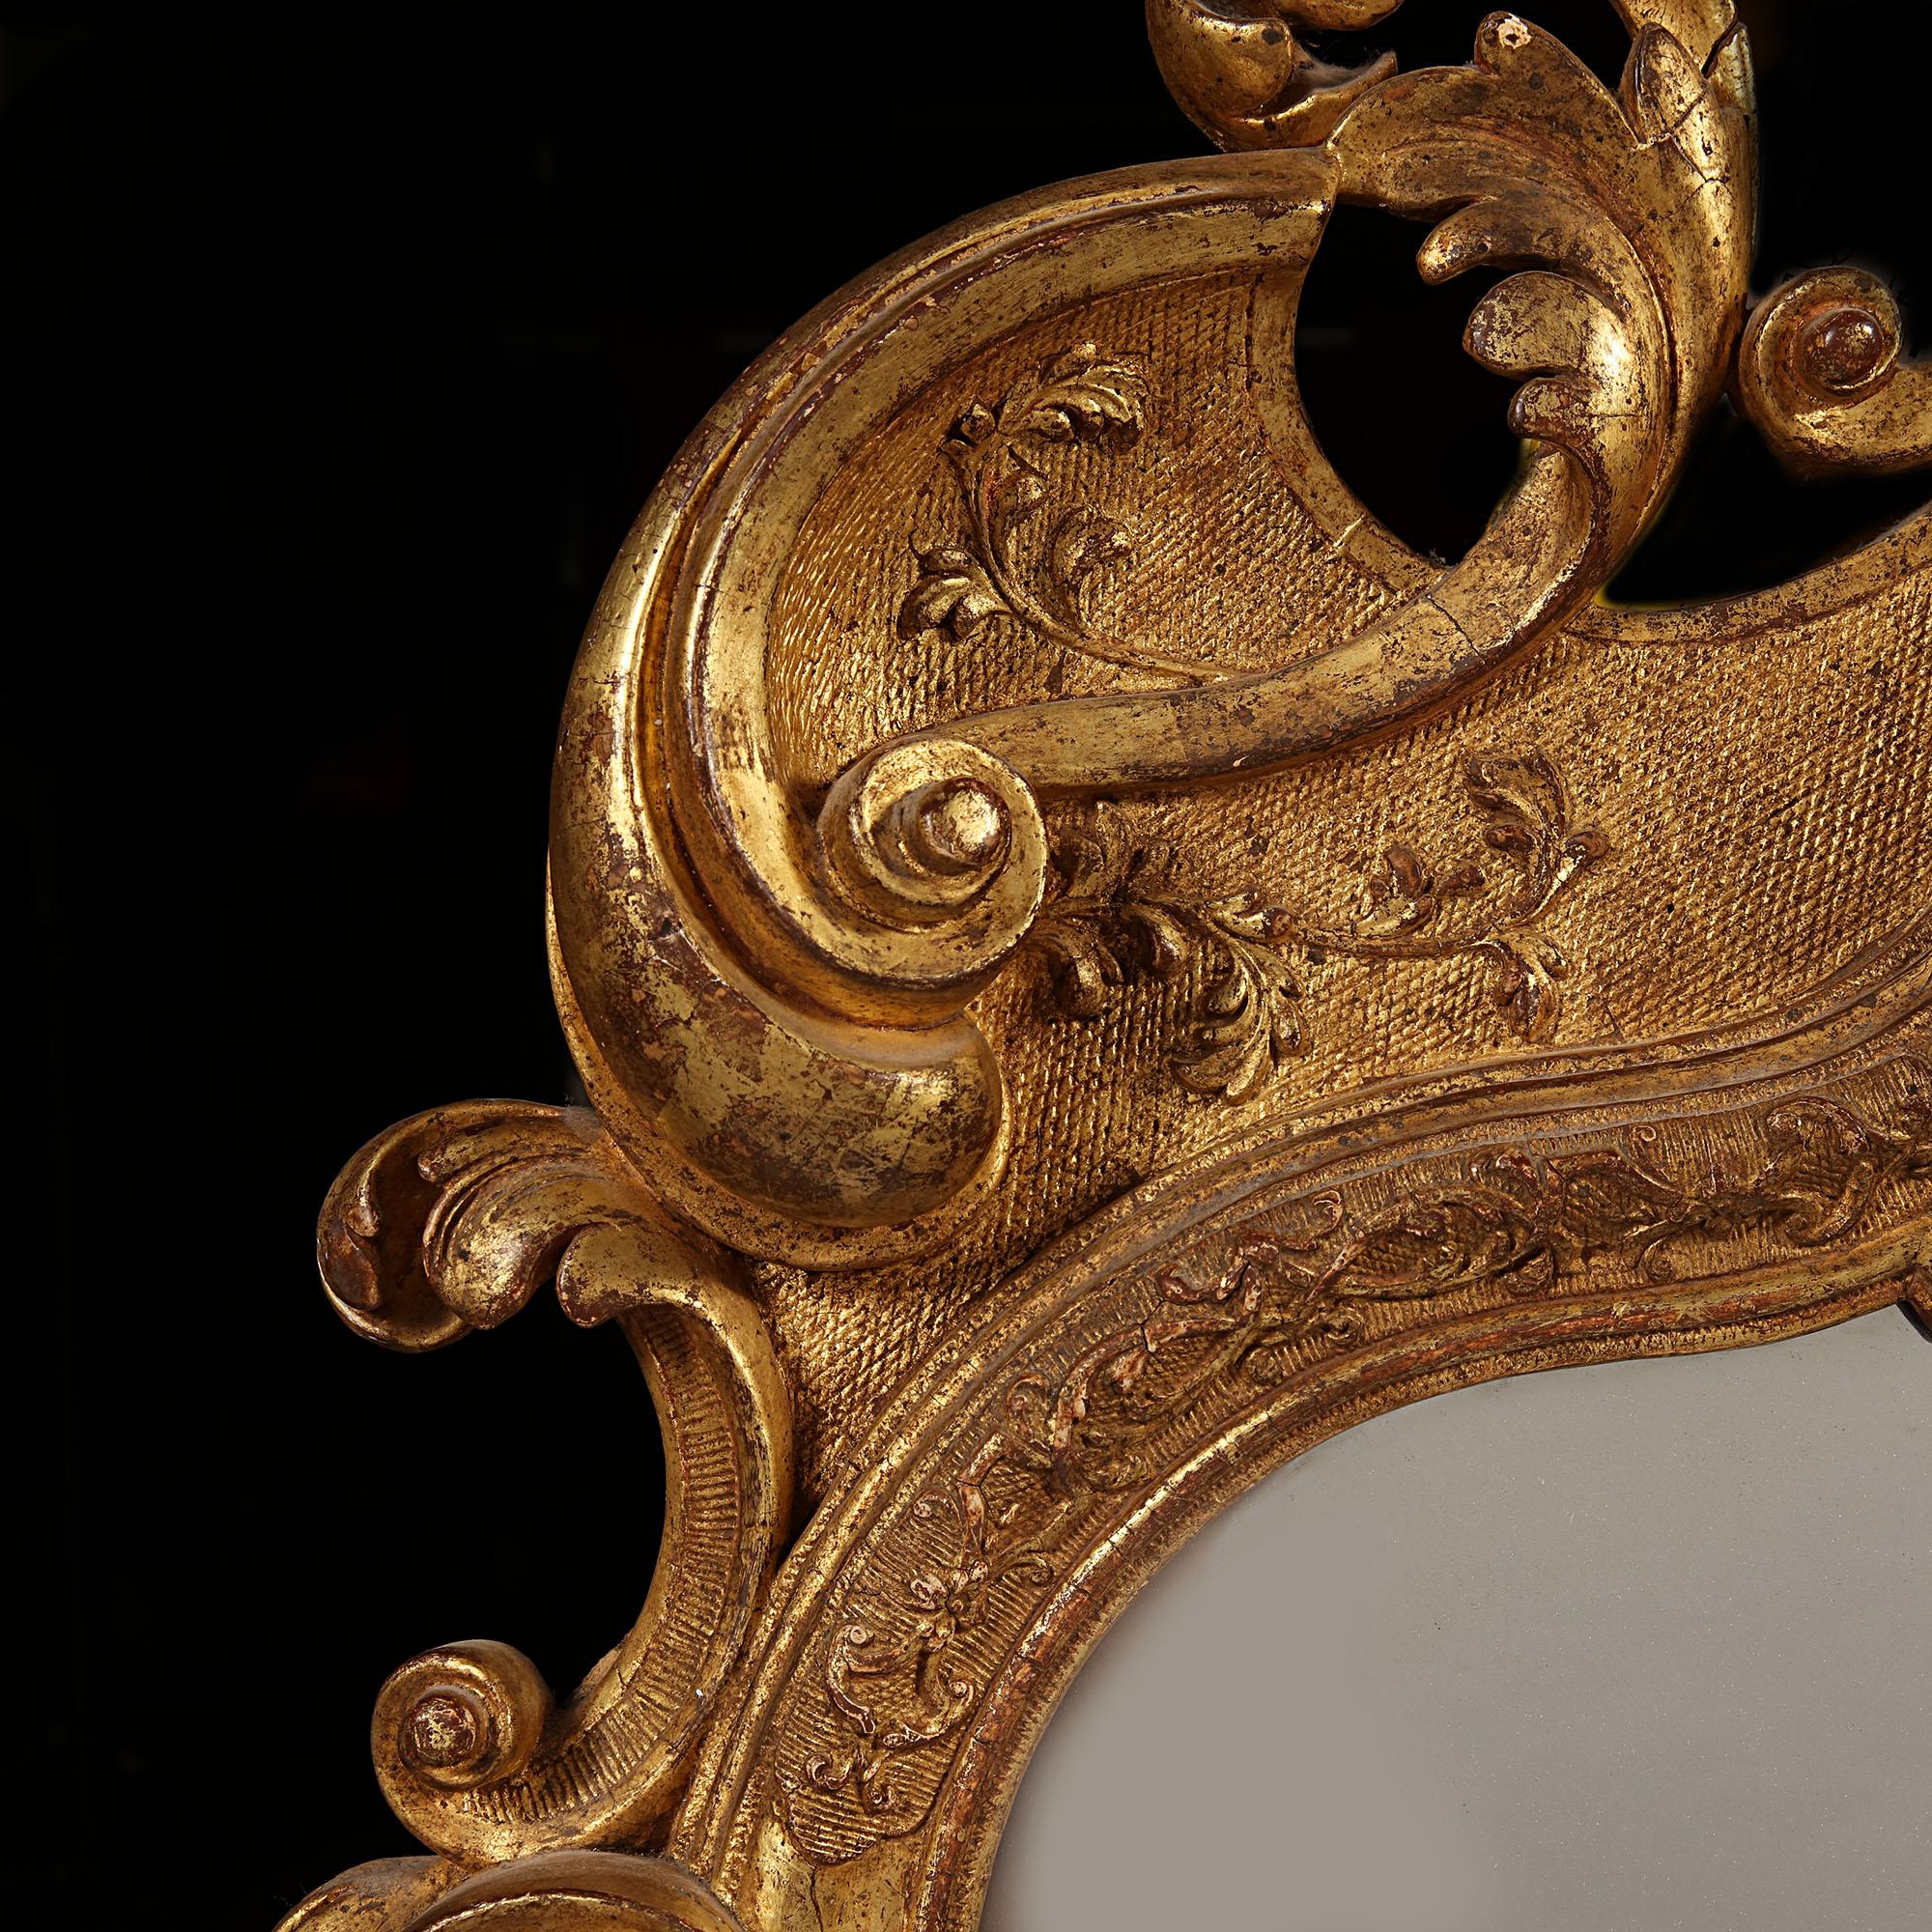 A fine early 18th century German giltwood pier mirror, the gilt frame with burnished and hatched reserves in carved gesso overlaid with strapwork, the crest with a flamboyant arrangement of bold scrolls and acanthus ornament around a framed scallop